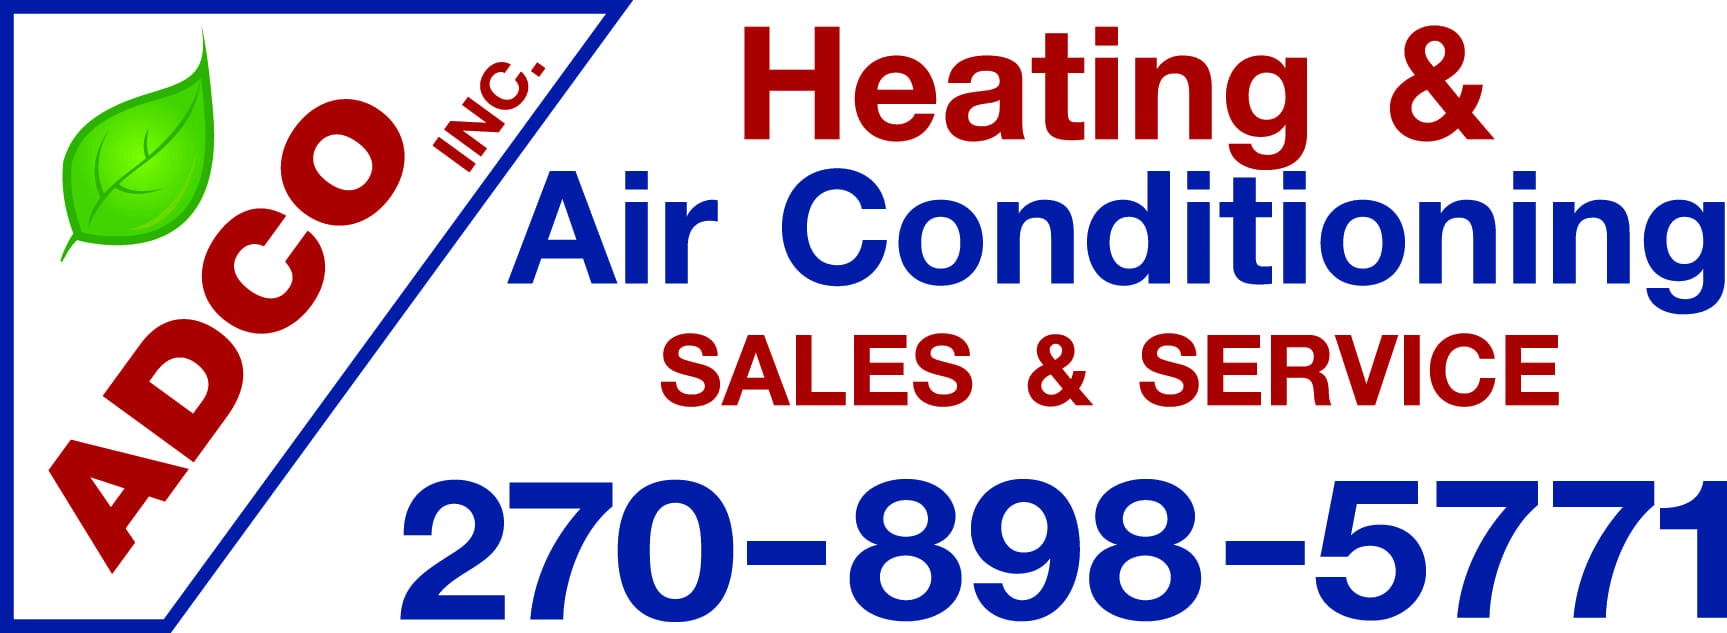 Adco Inc. Heating & Air Conditioning Logo